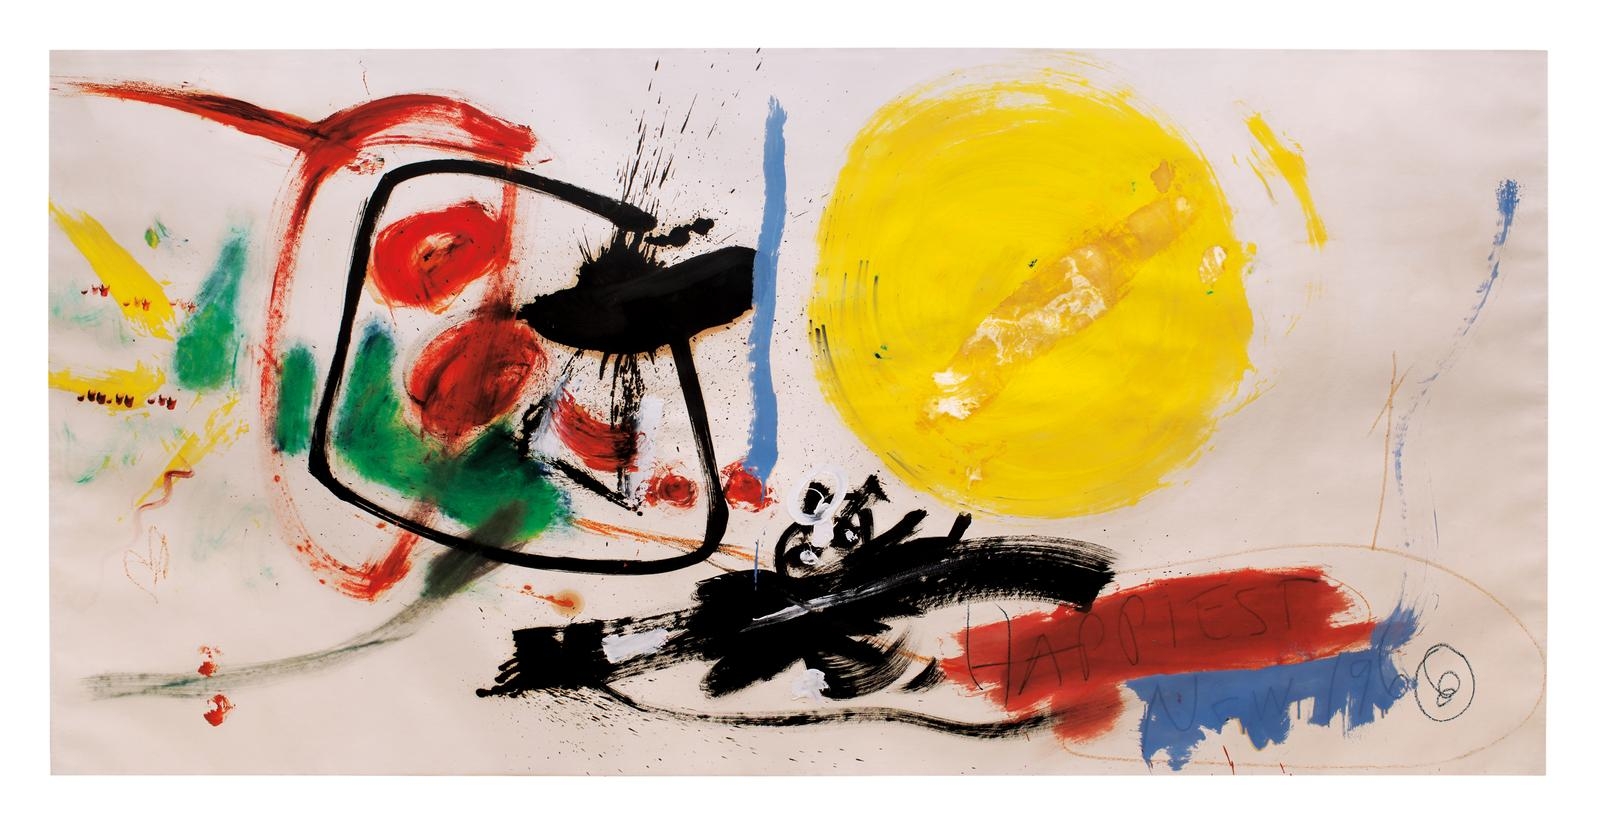 Helen Frankenthaler
New Year Greeting
December 1959
mixed media on paper
42 1/2 x 85 1/4 inches (108 x 216.5 cm)&amp;nbsp;